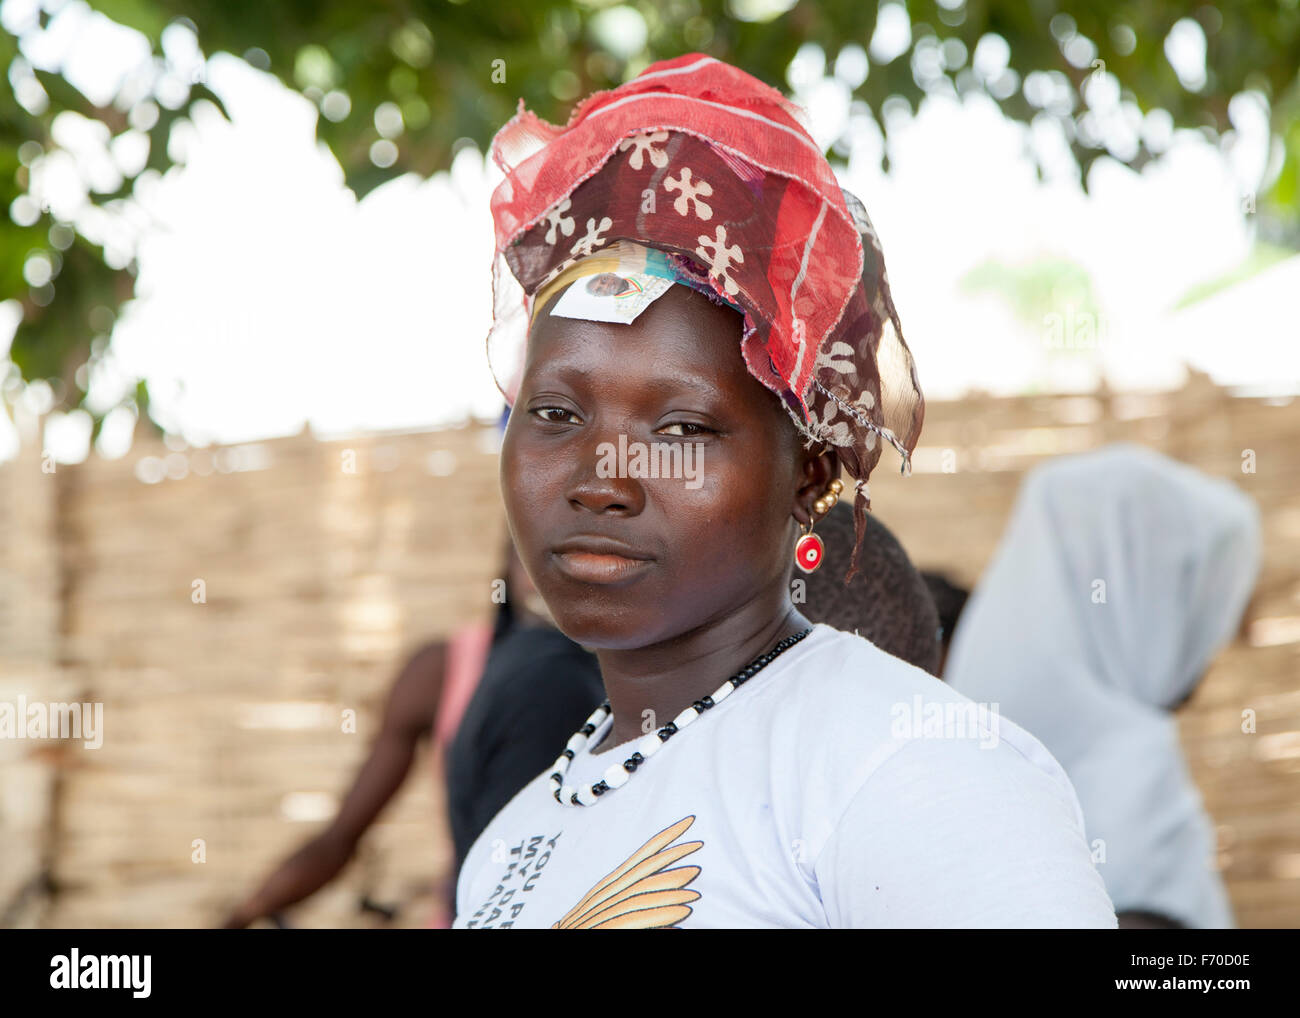 Gabu, Guinea-Bissau - May 15, 2014: portrait of an unidentified beautiful african girl. Daily scenes from rural Guinea-Bissau Stock Photo